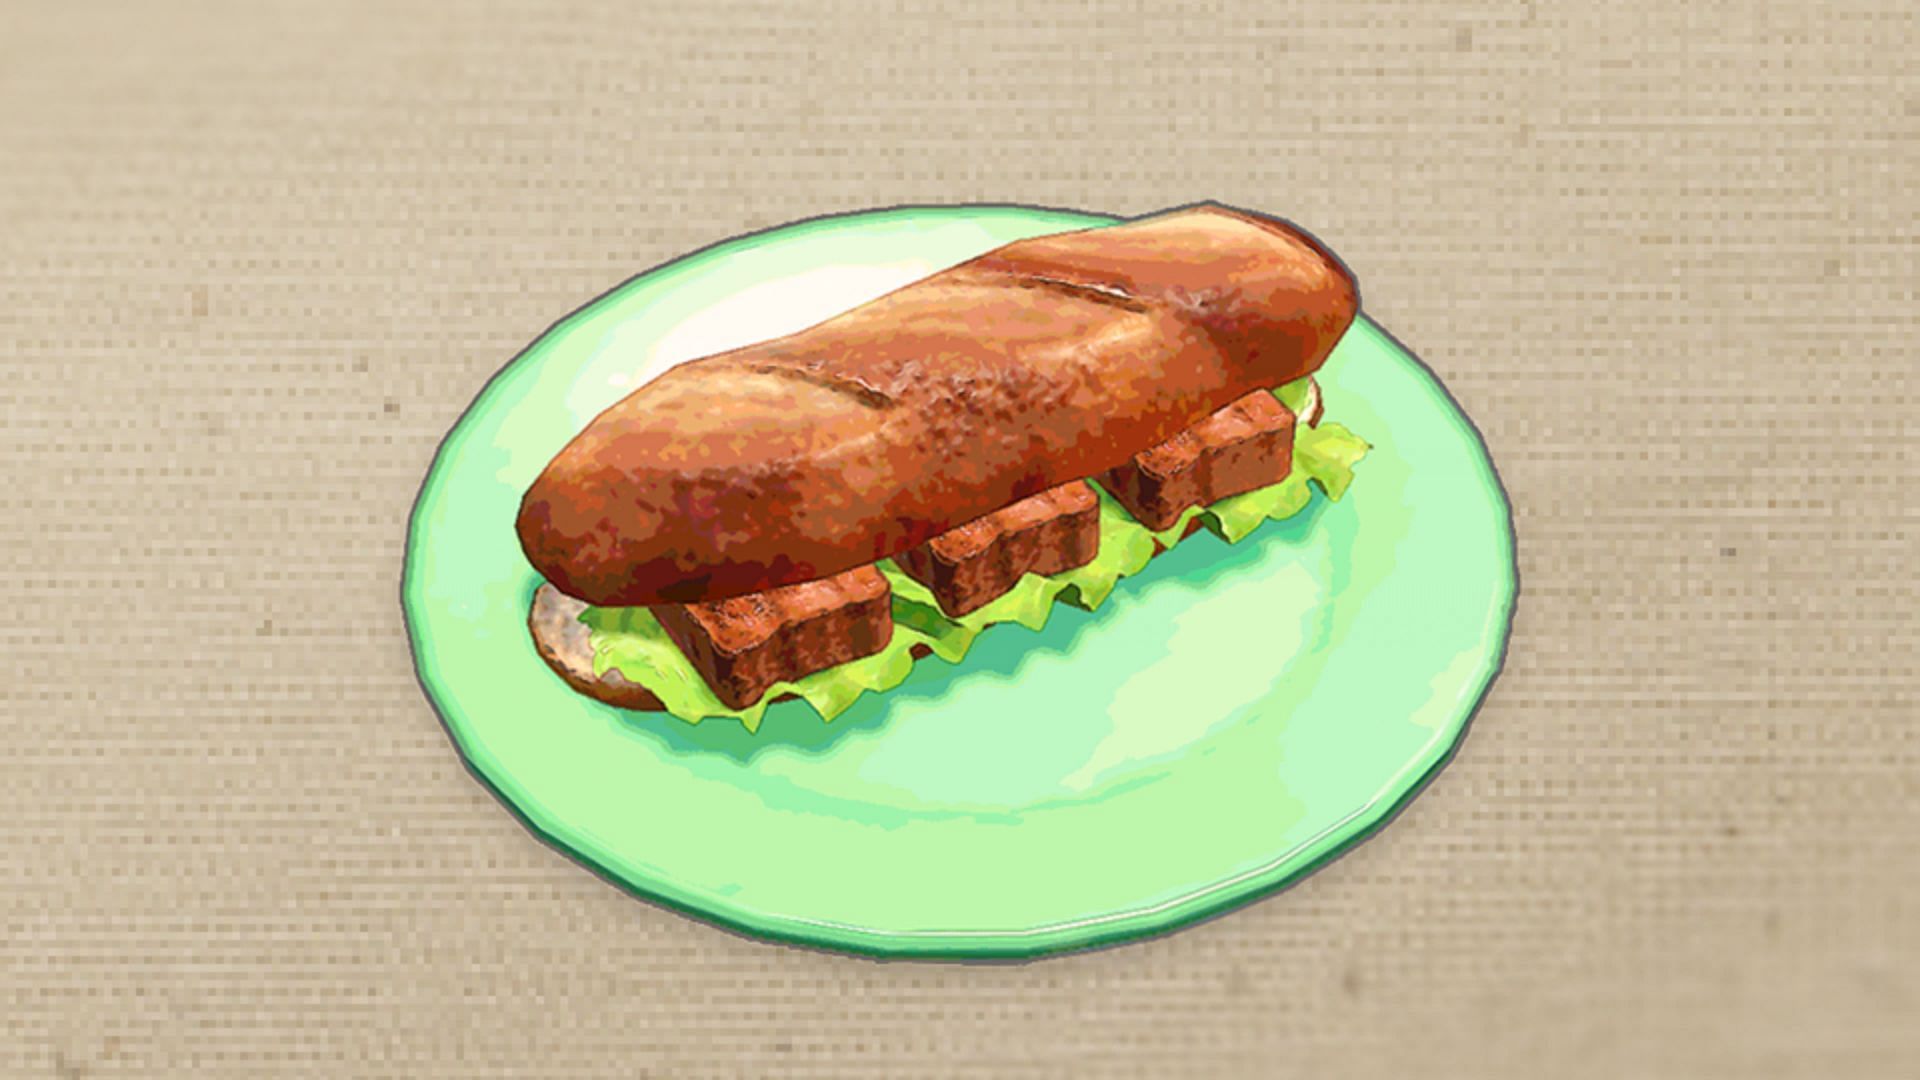 How To Make Egg Power 3 Sandwiches and Are They Worth It? Pokemon